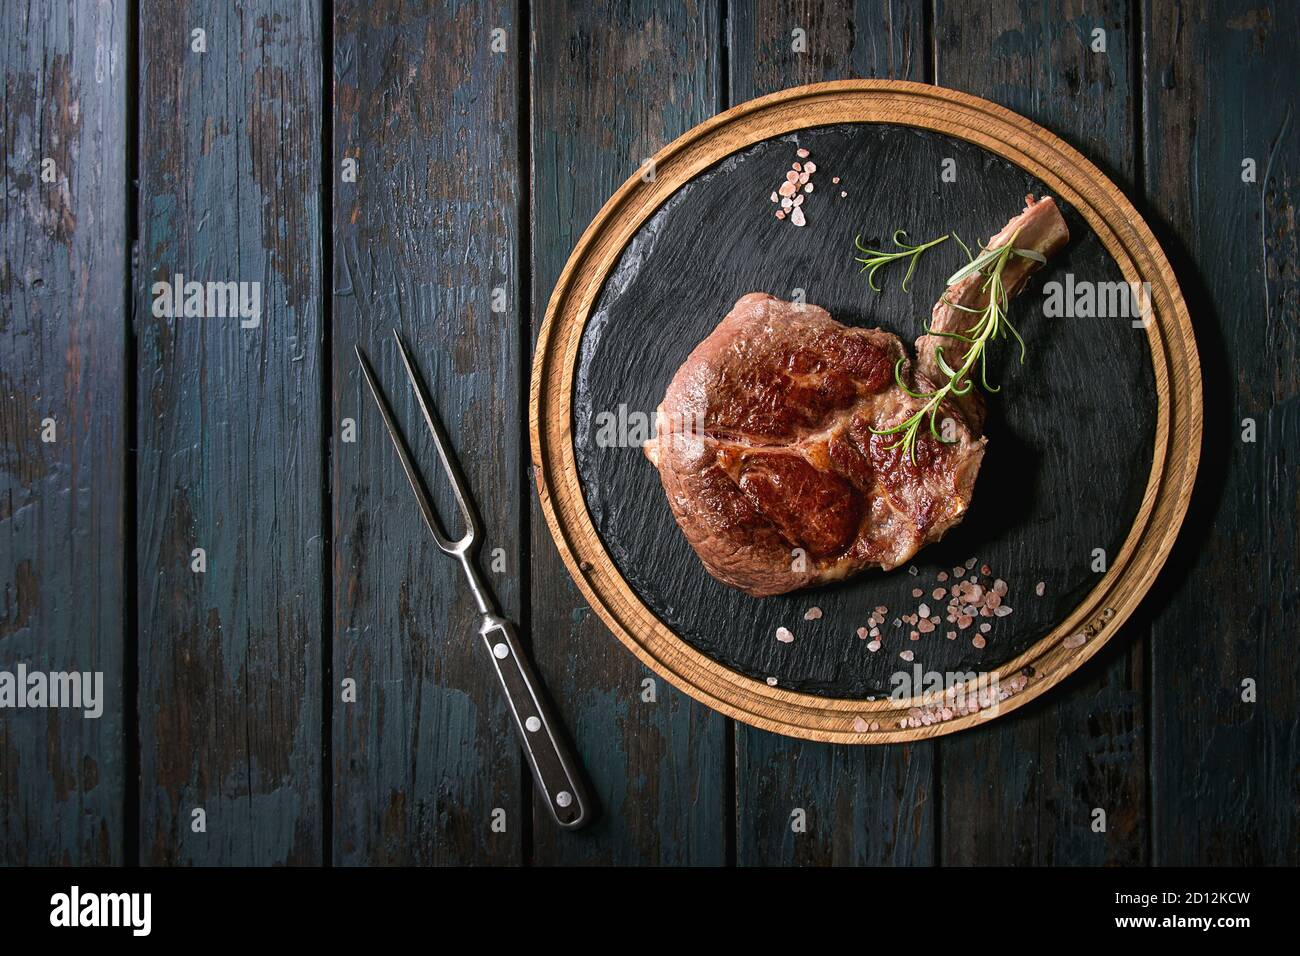 Grilled black angus beef tomahawk steak on bone served with salt, pepper and rosemary on round wooden slate cutting board with meat fork over dark woo Stock Photo